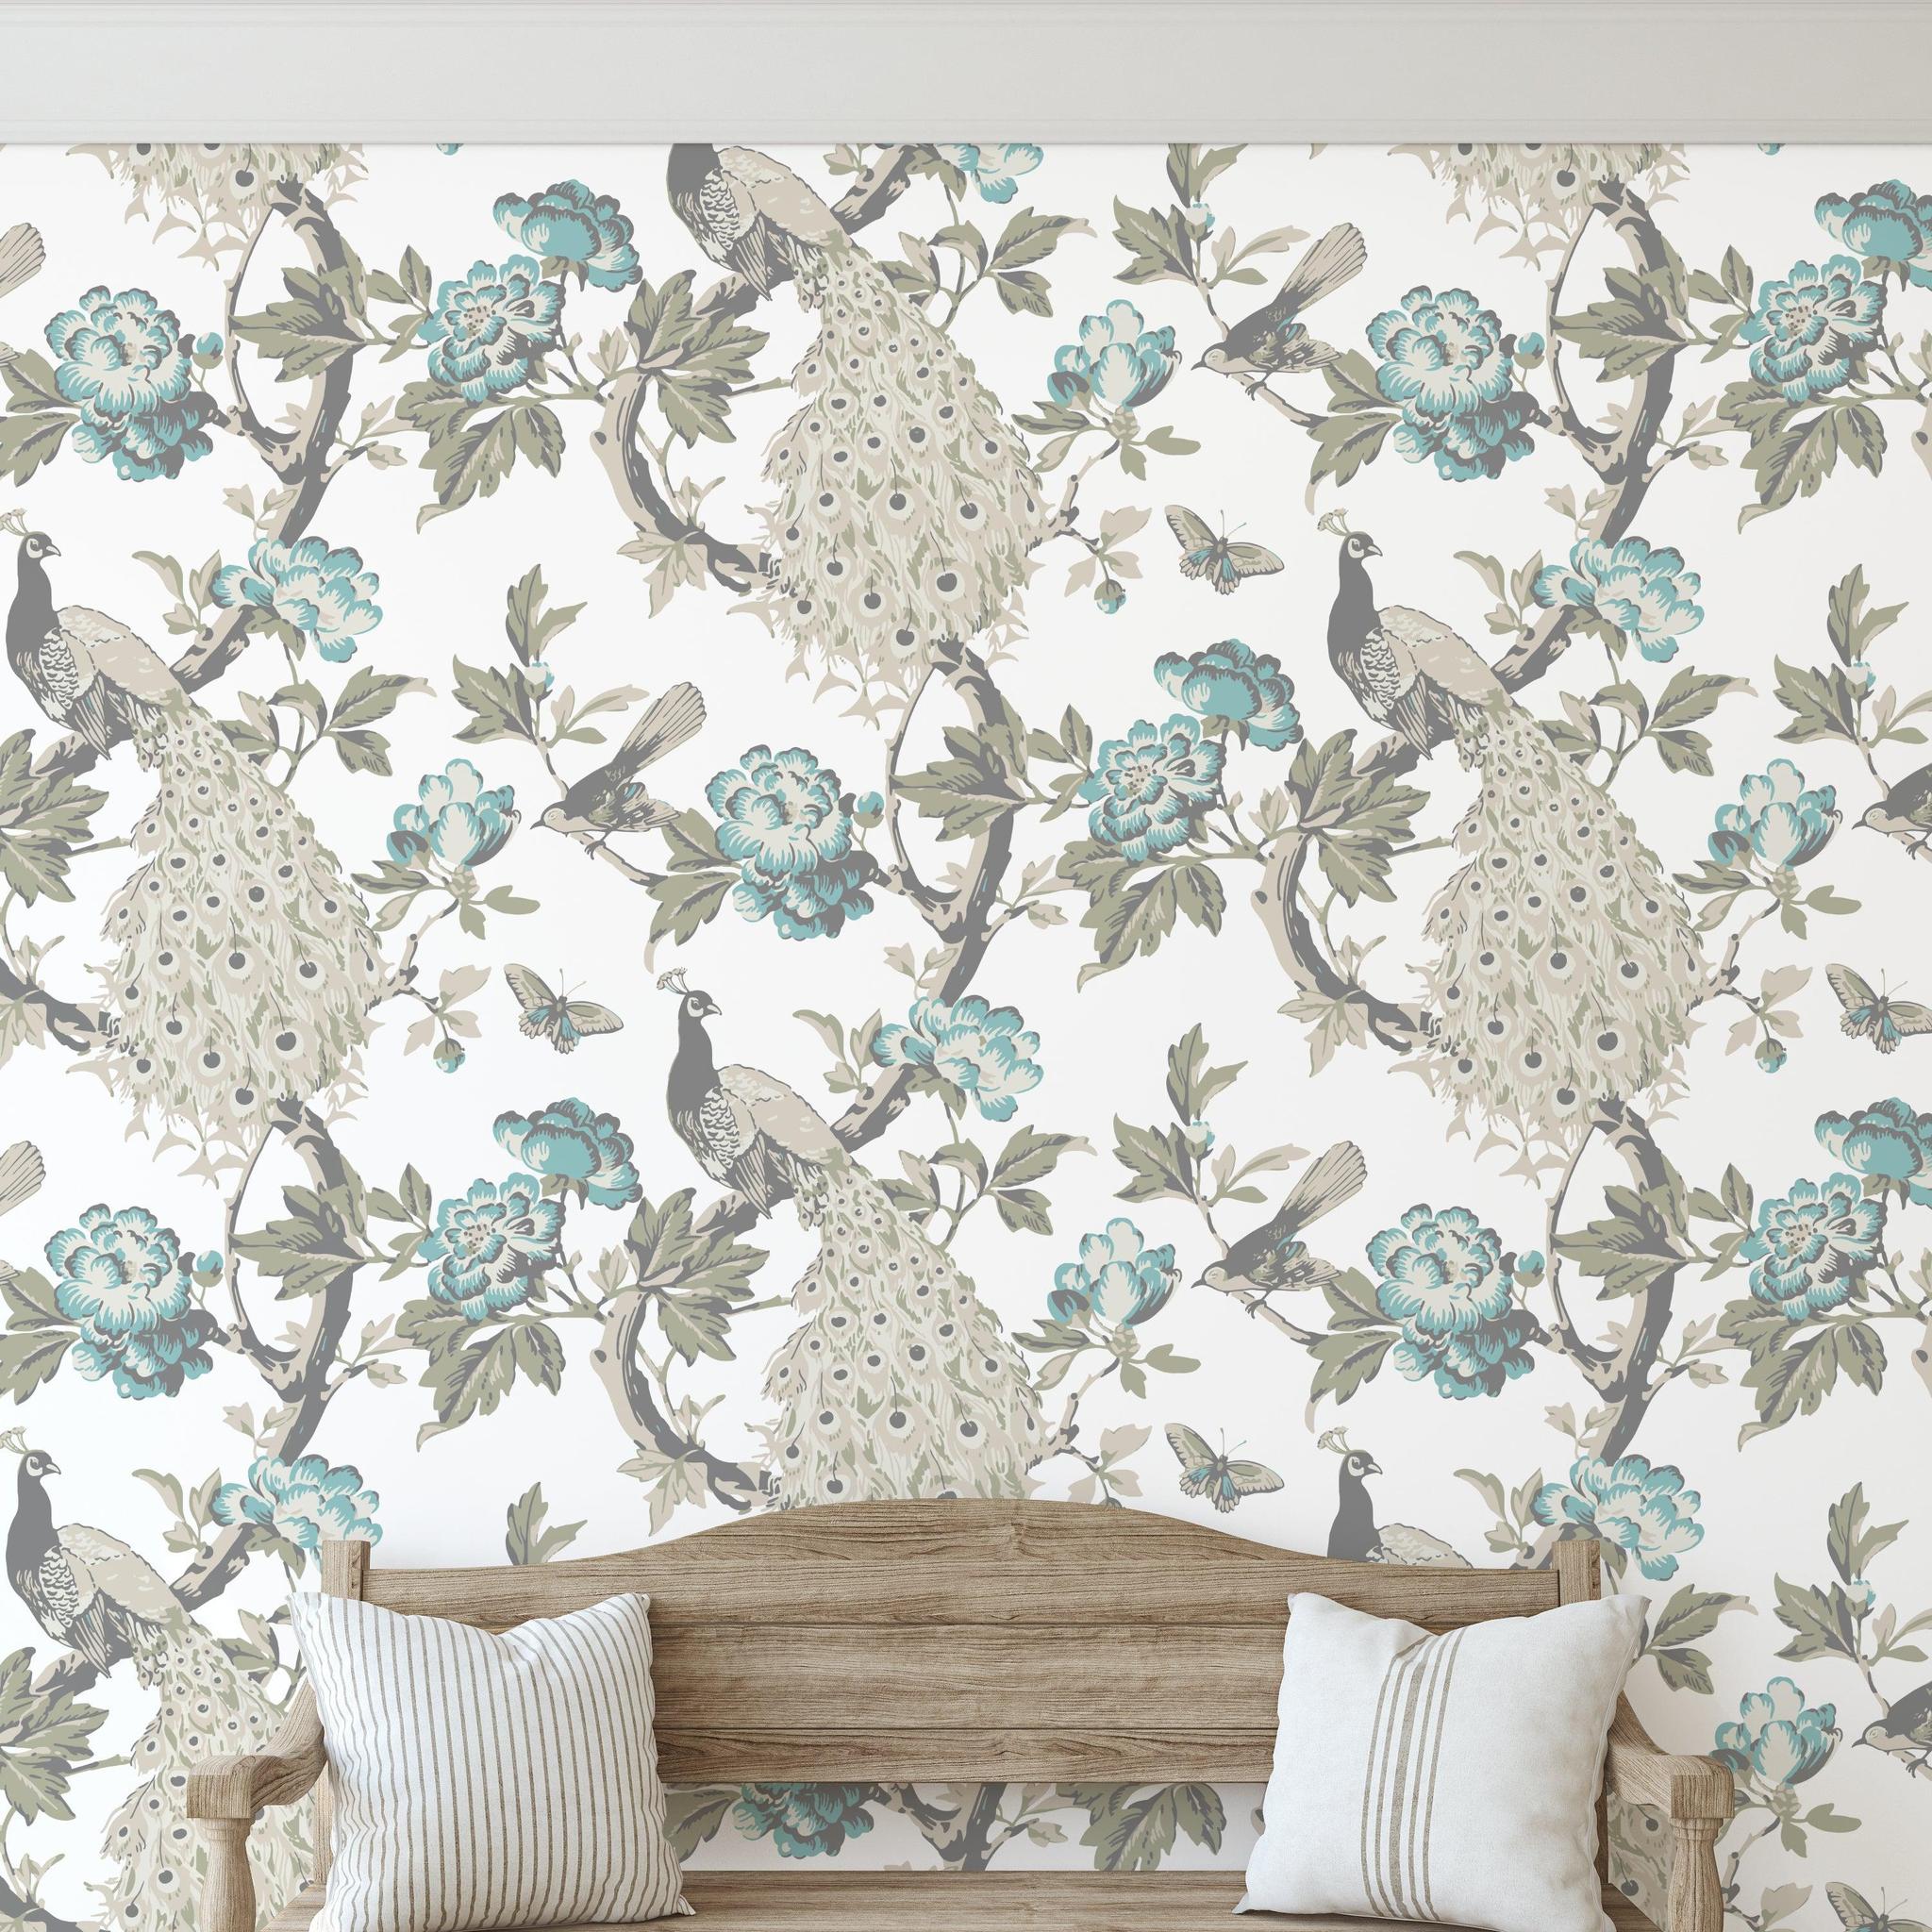 Hera (Blue) Wallpaper from Wall Blush SG02 in a cozy living room, highlighting the elegant peacock design.
